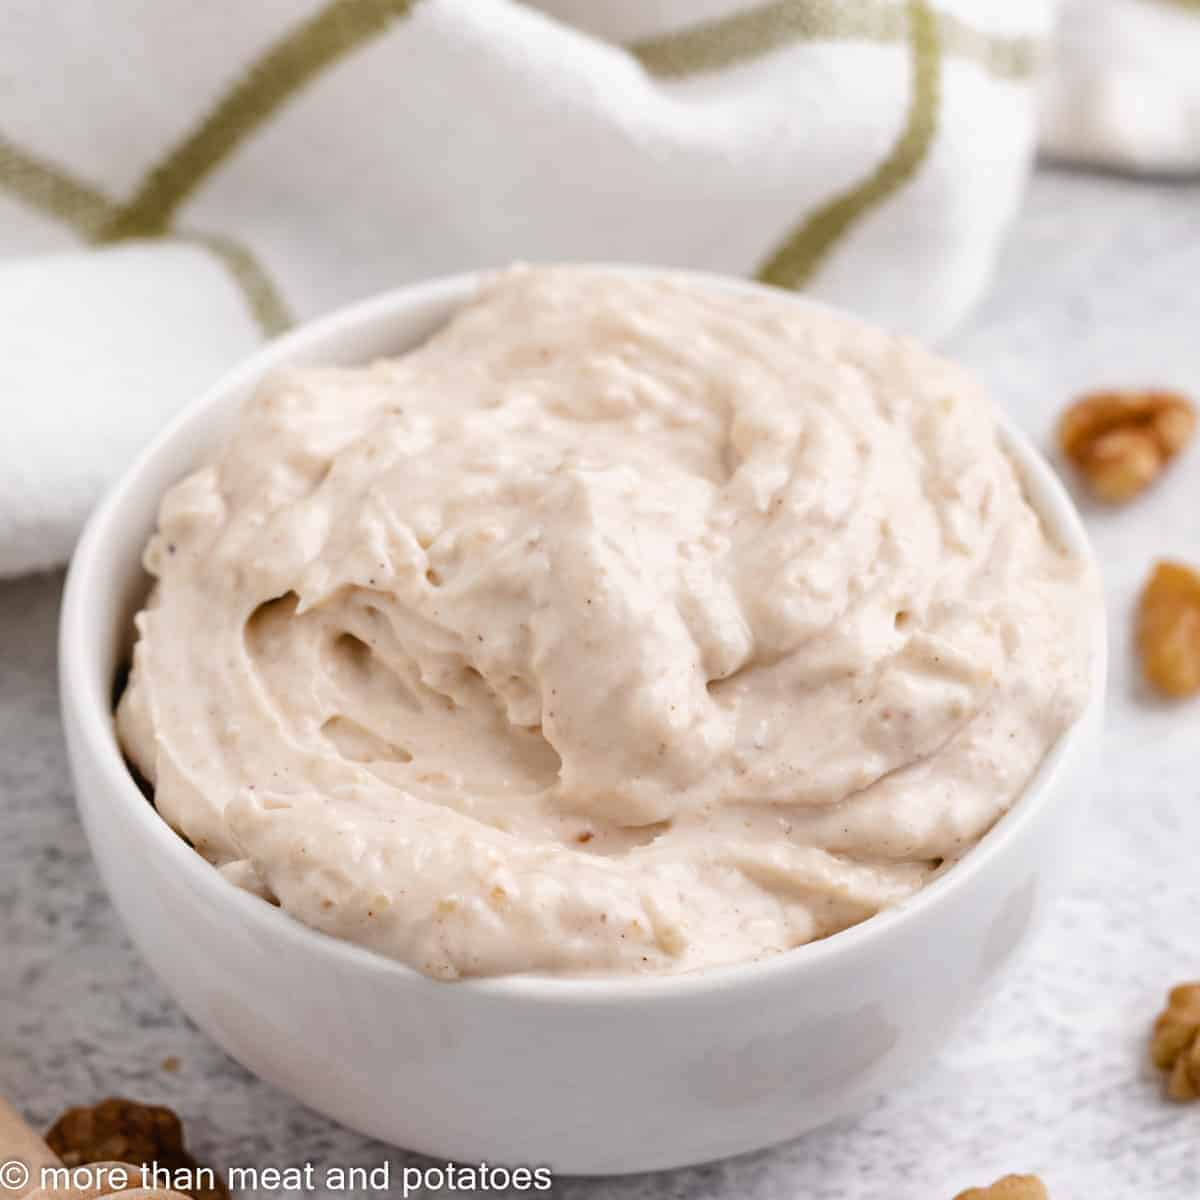 The finished honey walnut cream cheese in a bowl.